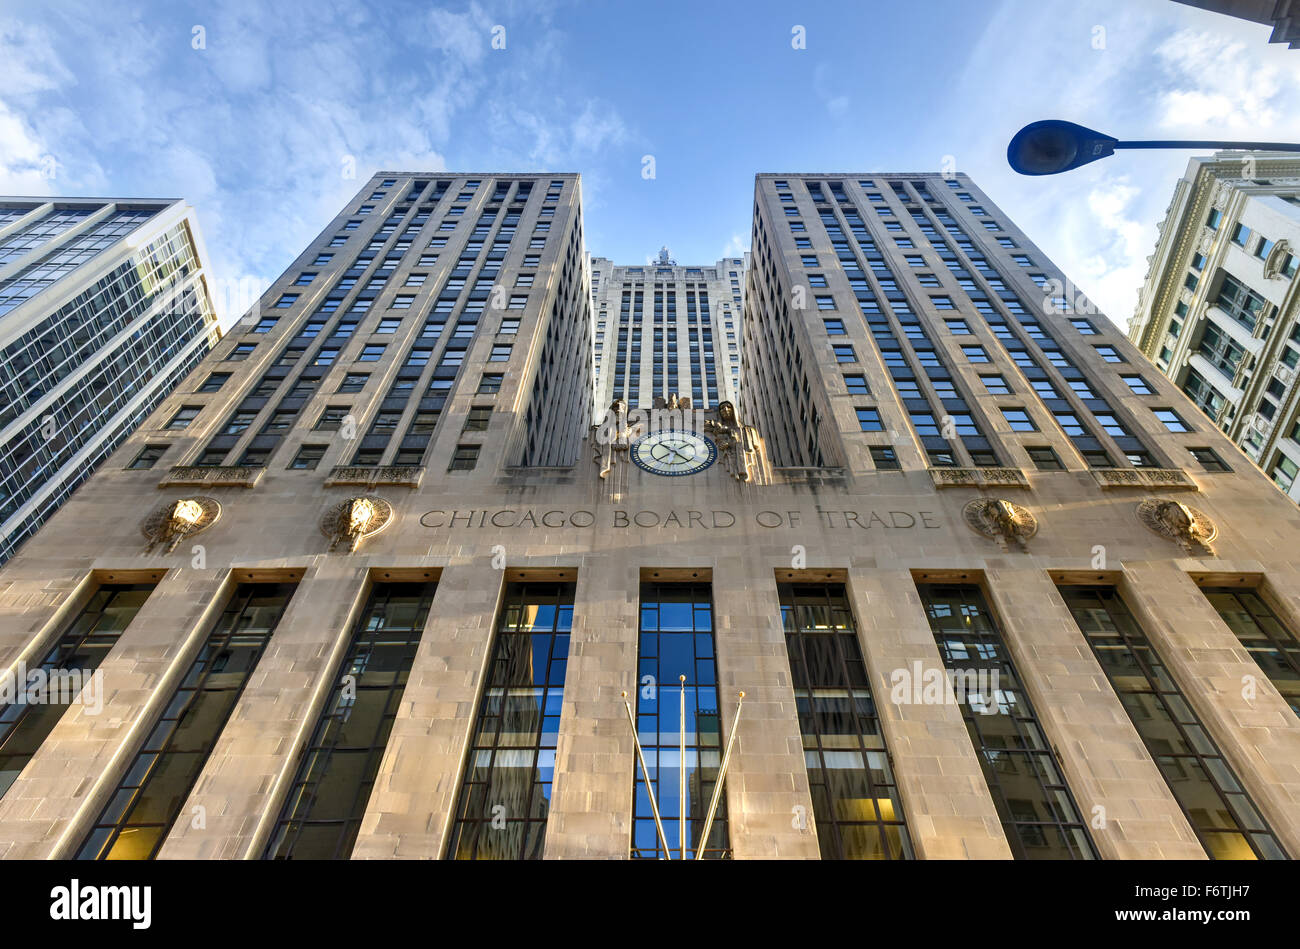 Chicago - September 7, 2015: Chicago Board of Trade Building along La Salle street in Chicago, Illinois. The art deco building w Stock Photo